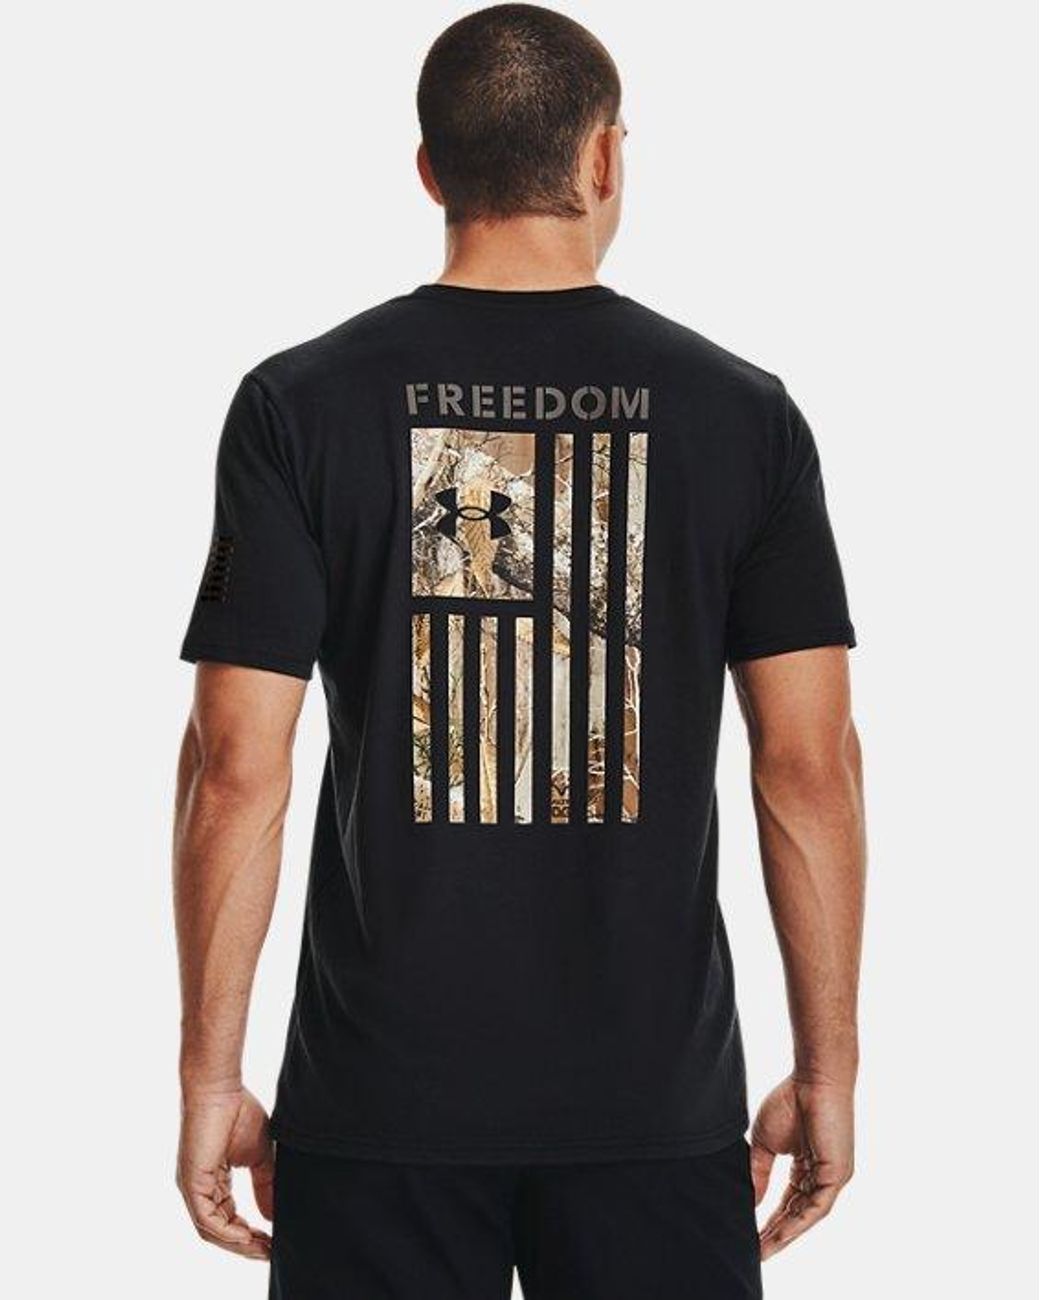 Under Armour Cotton Ua Freedom Flag Camo T-shirt in Black for Men - Lyst